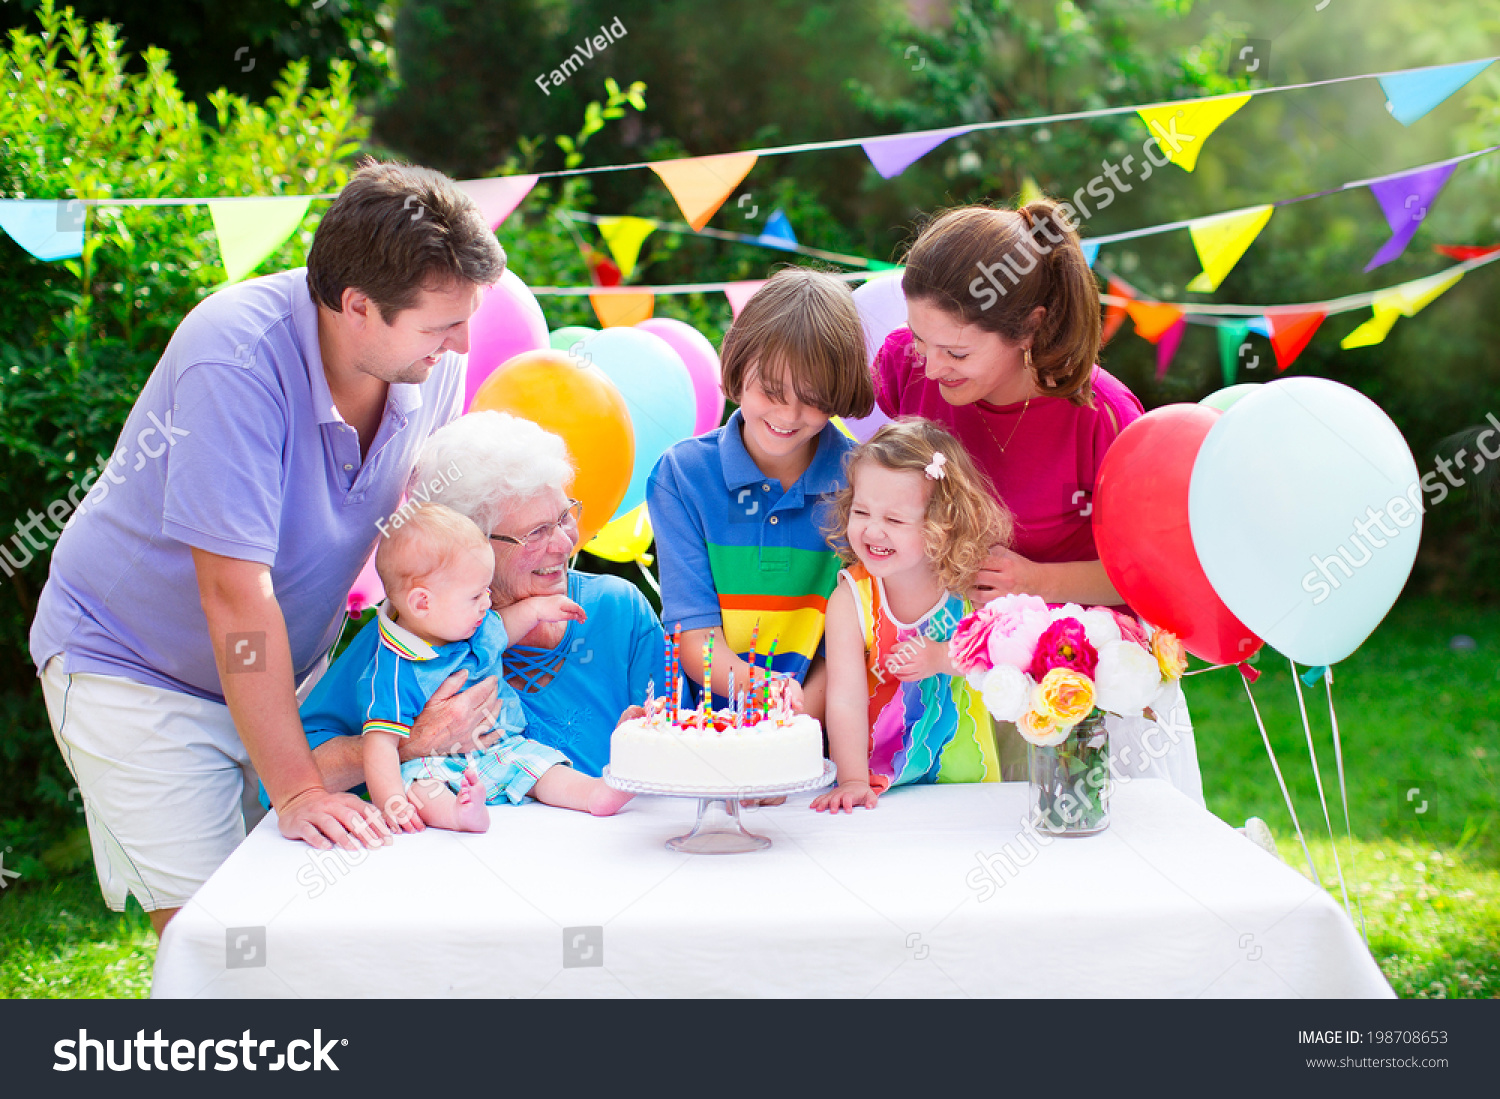 Happy big family - young parents, grandmother, three kids, teenage boy, toddler girl and little baby celebrating birthday party with cake and candles in the garden decorated with balloons and banners #198708653